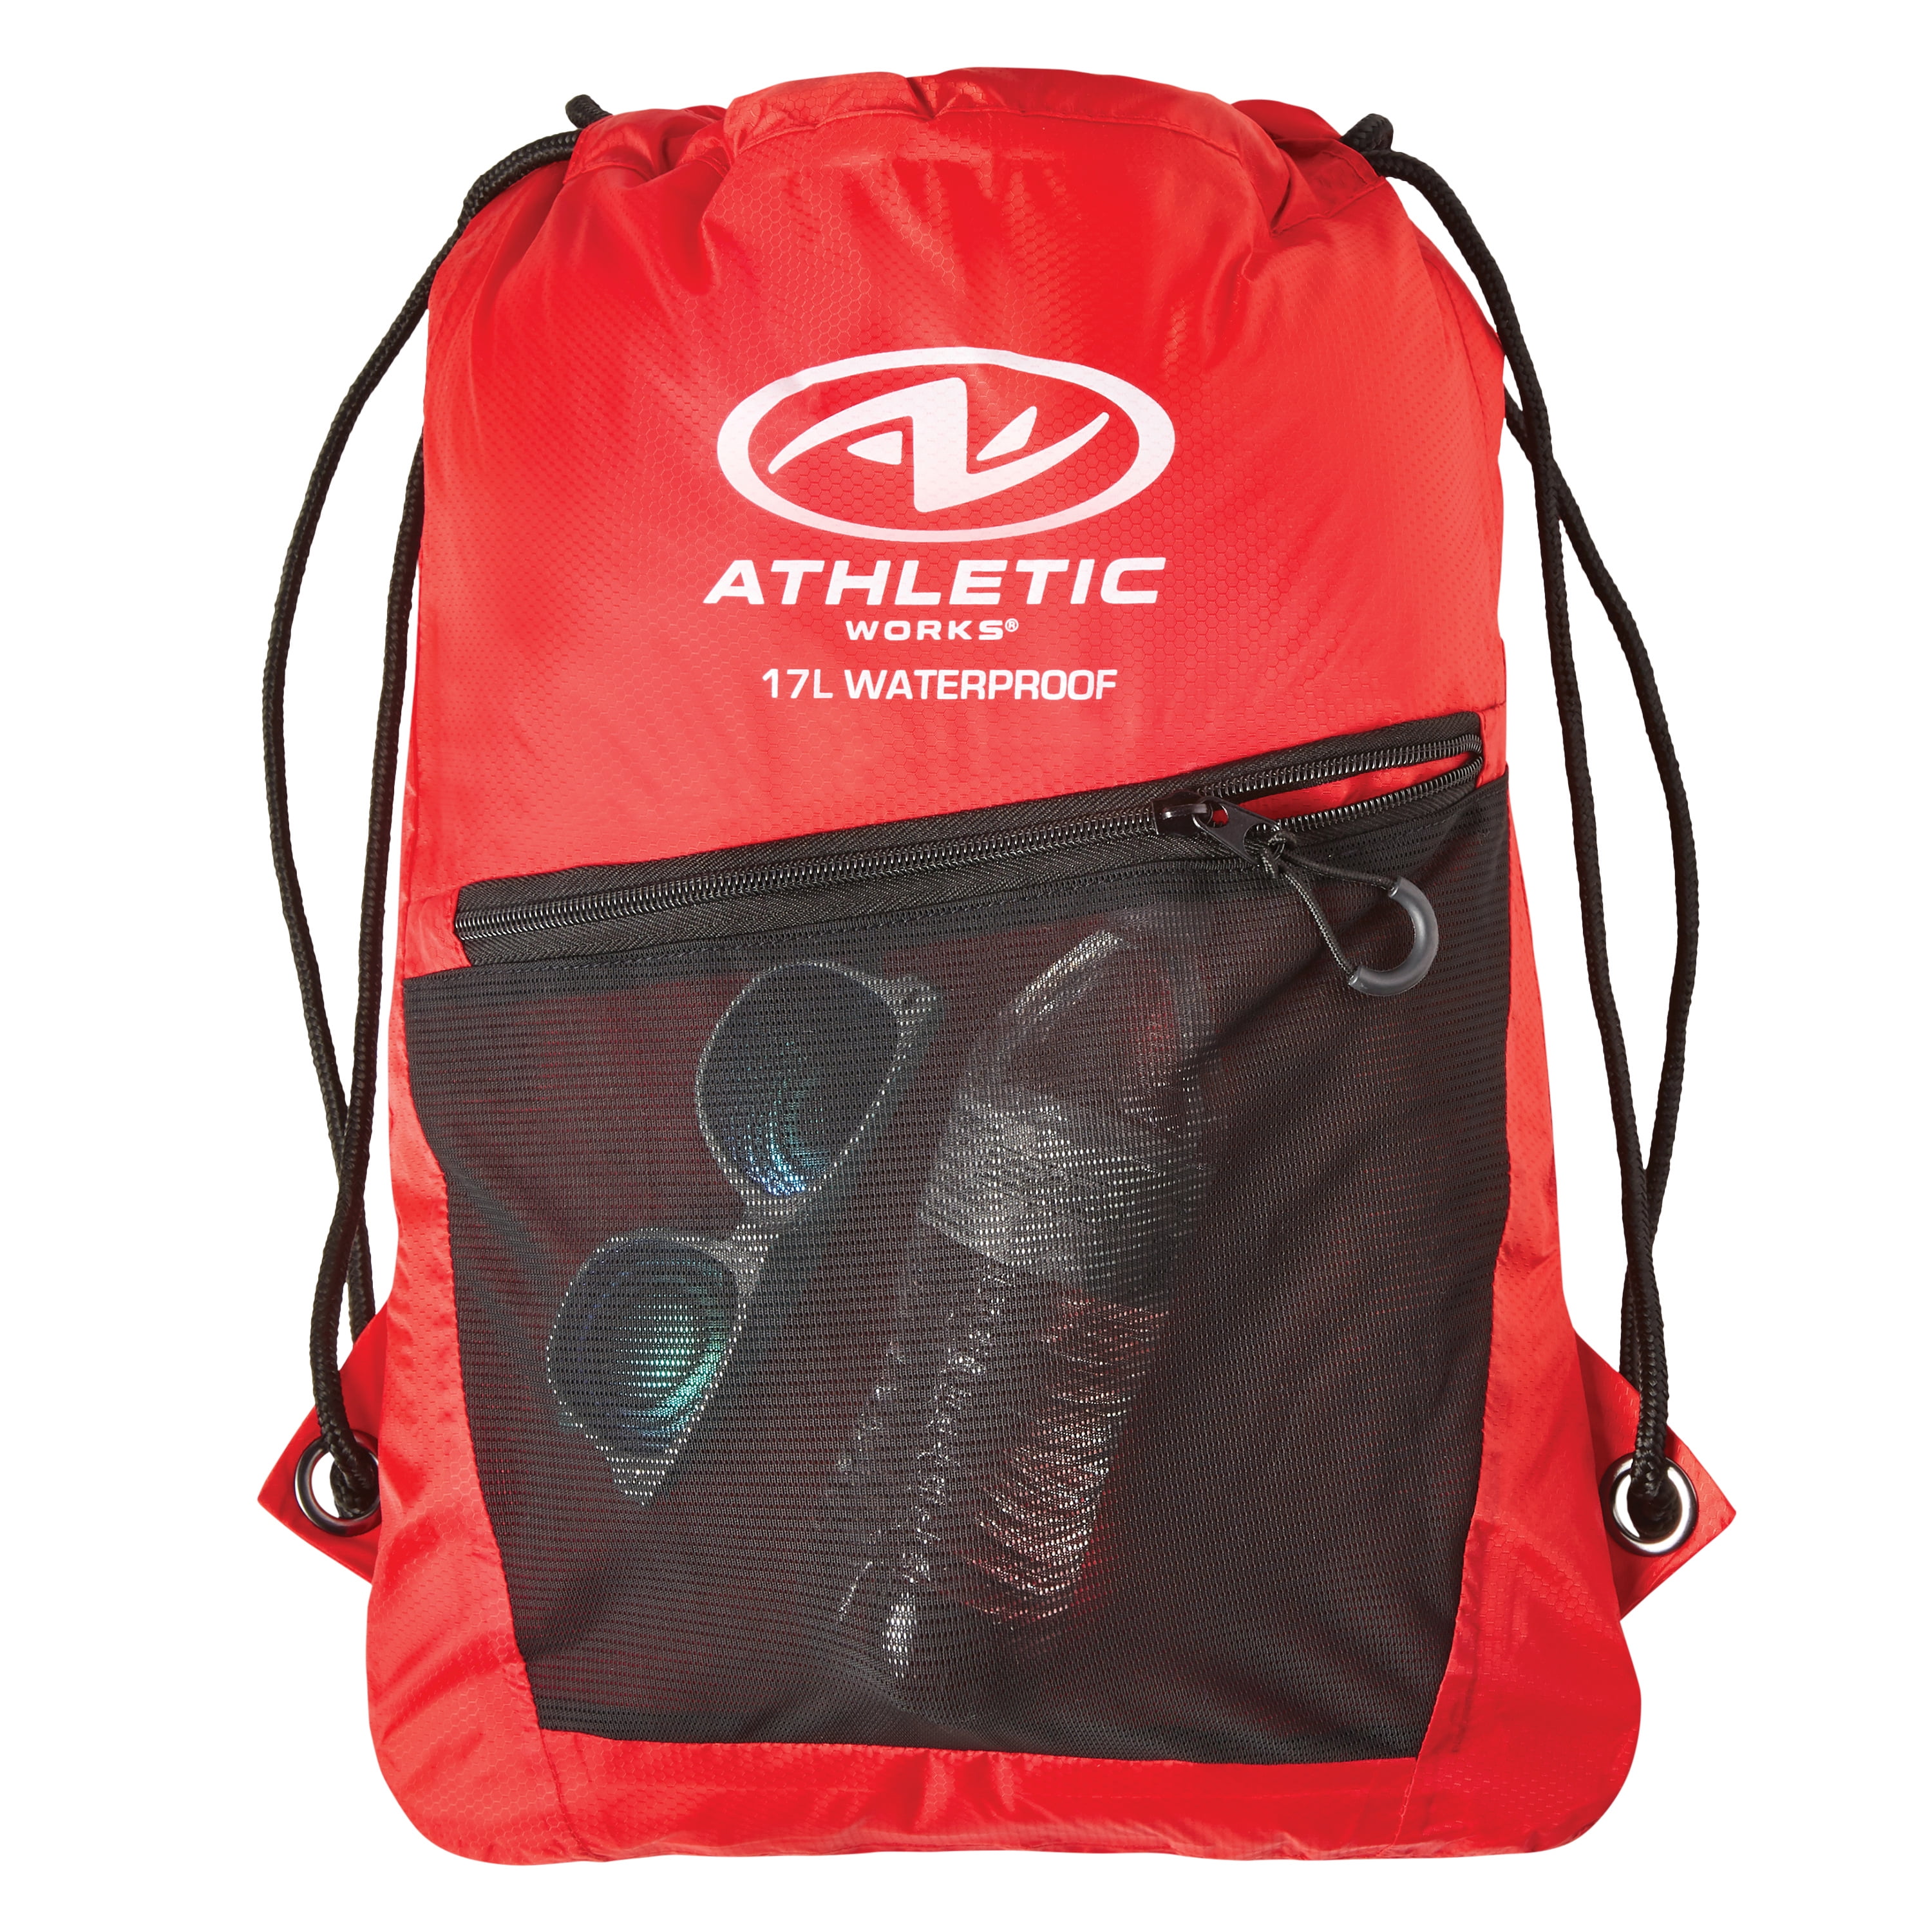 Kilauea Mountain Windswept smog Athletic Works Waterproof Mesh Swim Backpack with Drawstring and Shoulder  Strap, Red - Walmart.com